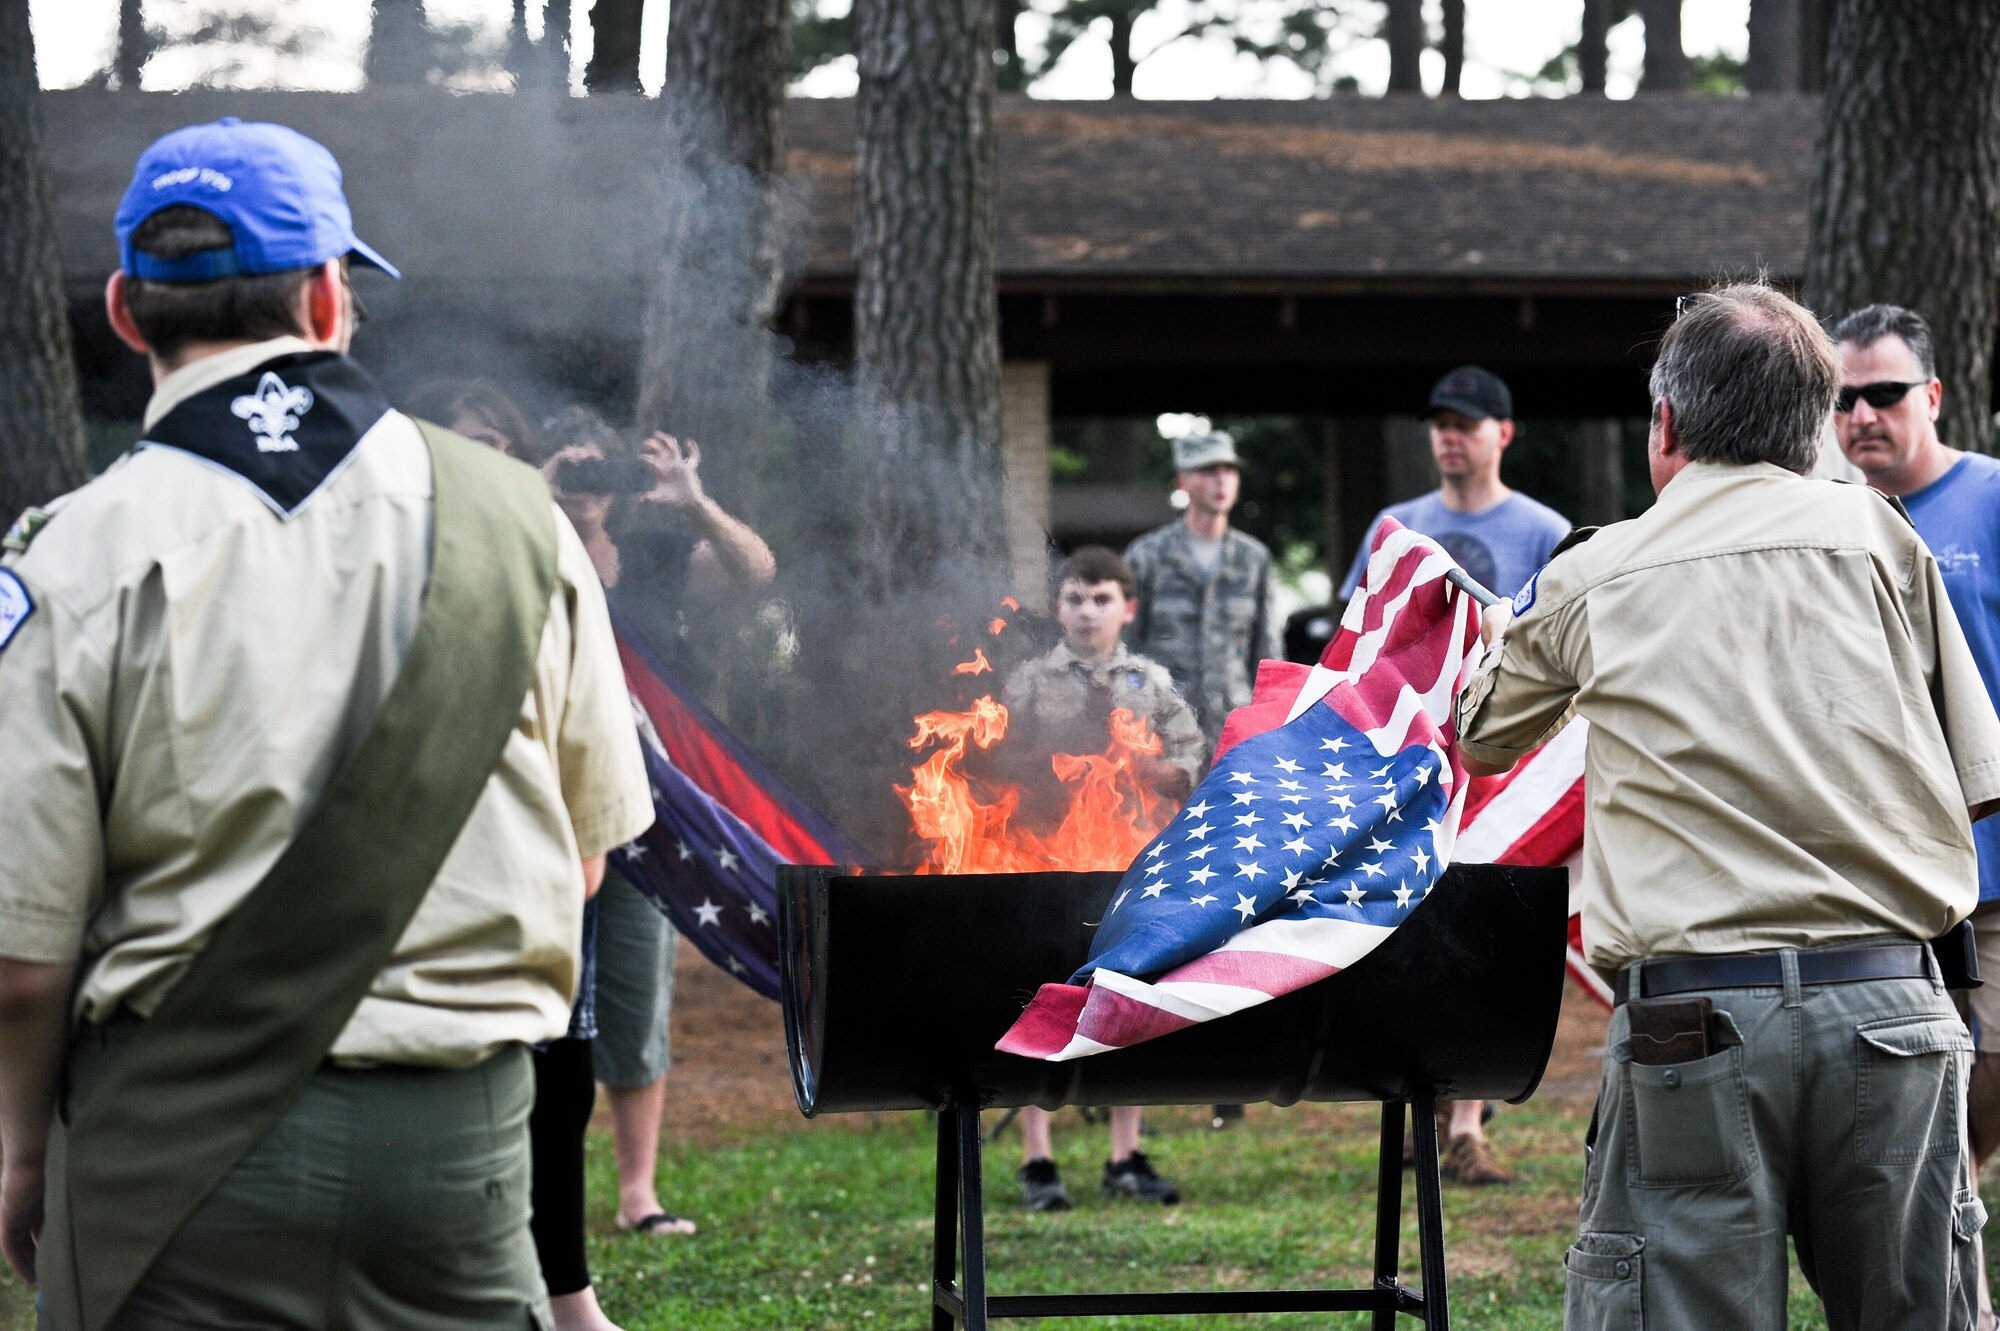 Bill Tilley, Troop 11 committee chair member, places a flag on the ceremony pyre June 14, 2014, at Seymour Johnson Air Force Base, North Carolina. The event was held on the same day the American flag was adopted in 1777, Flag Day. (U.S. Air Force photo/Airman 1st Class Aaron J. Jenne)